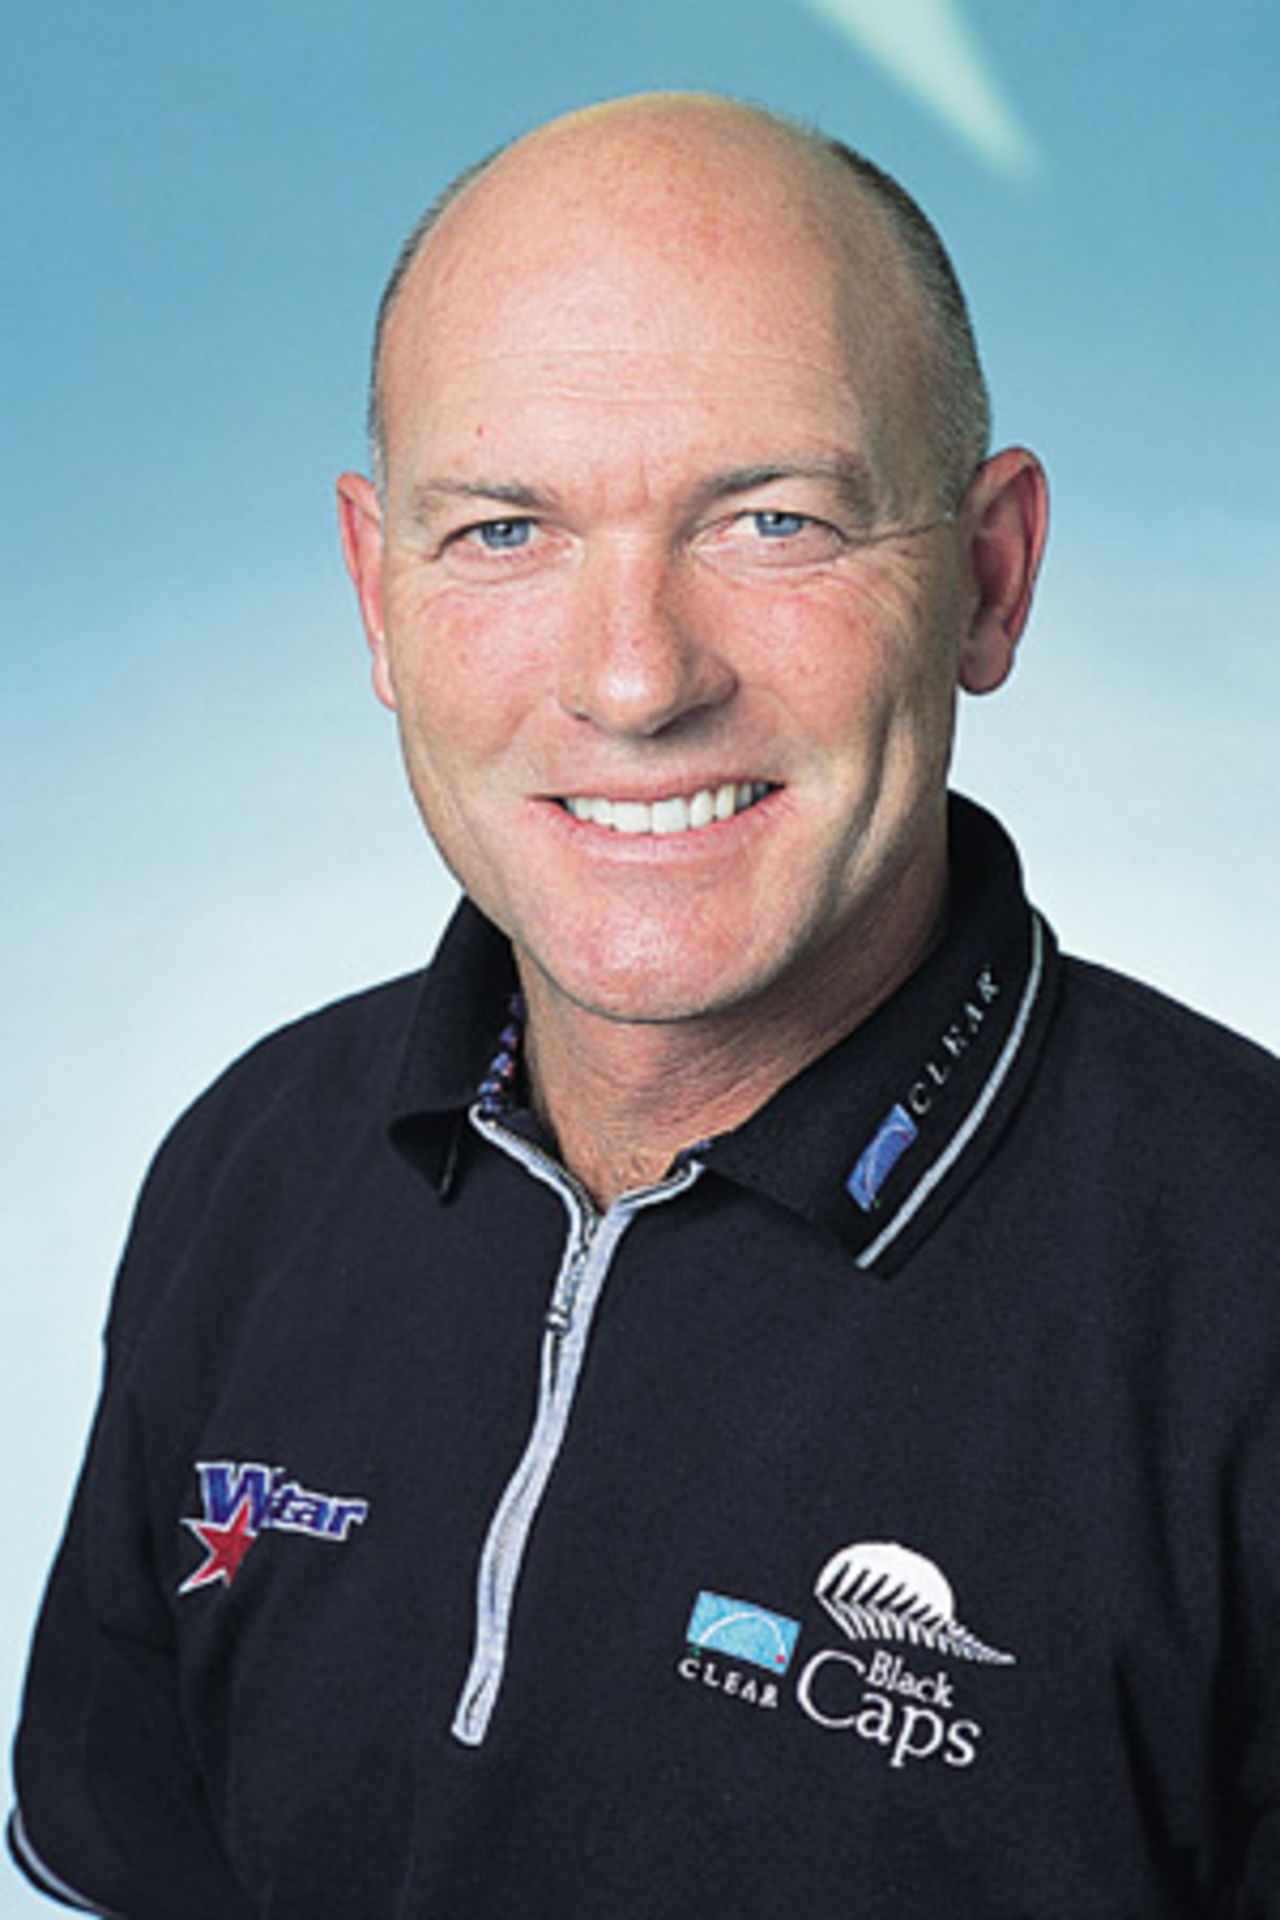 Portrait of Jeff Crowe - New Zealand manager in the 2001/02 season.